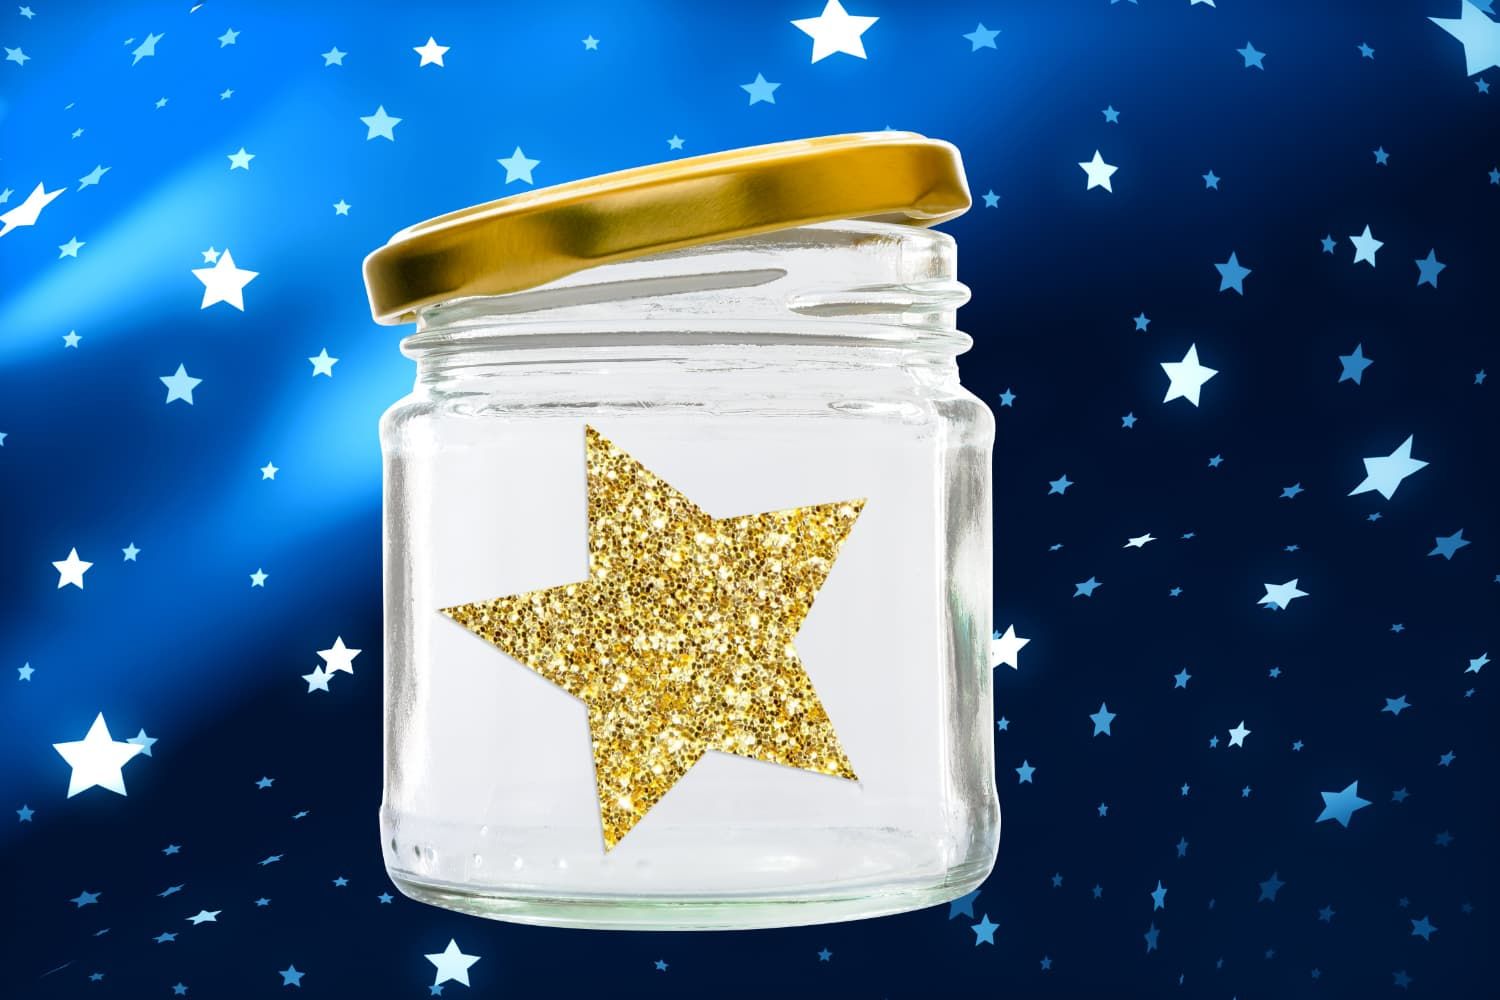 Object%20lesson%20-%20Stars%20in%20a%20jar-6132cbc5 Bible